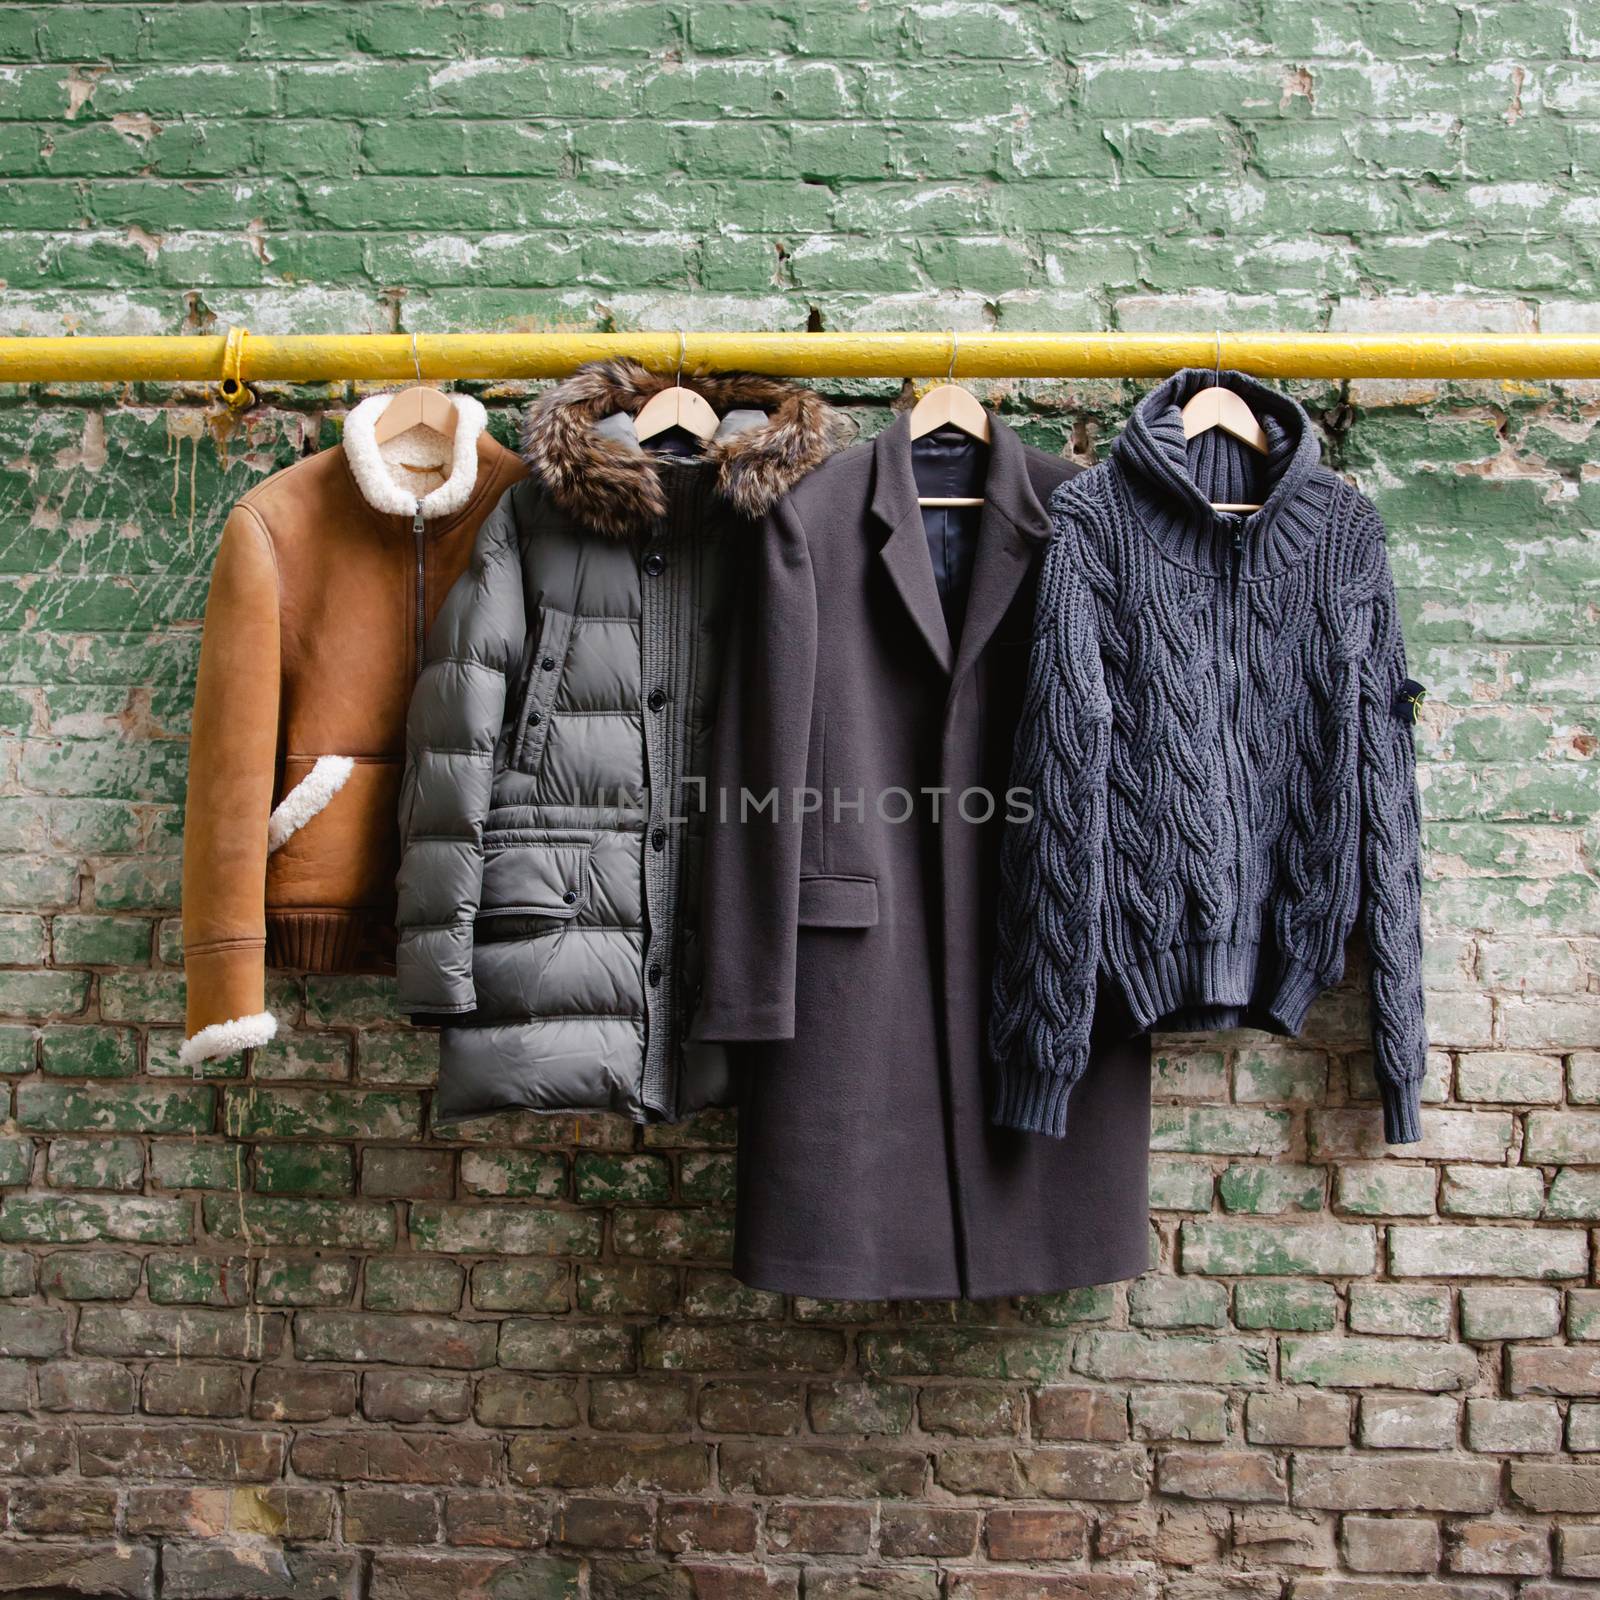 Men's trendy clothing on hangers on grunge brick wall. Concept background